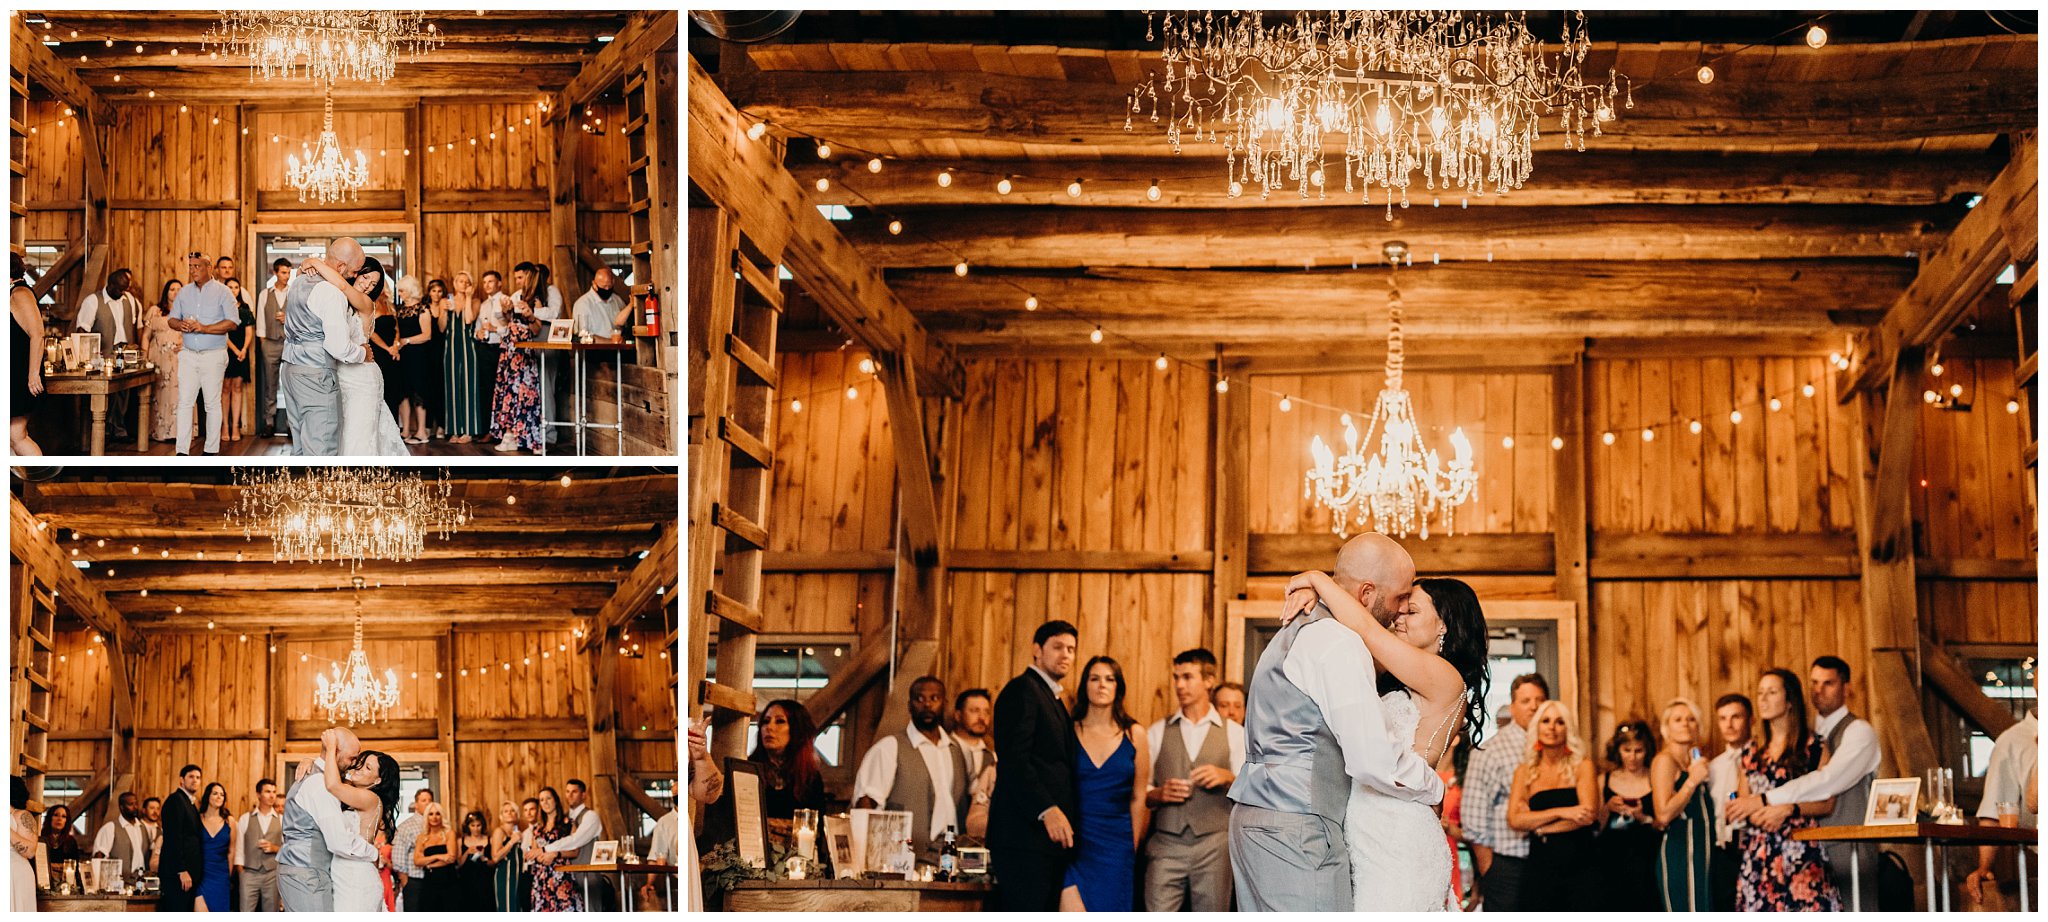 First dance at Rustic Acres Farm